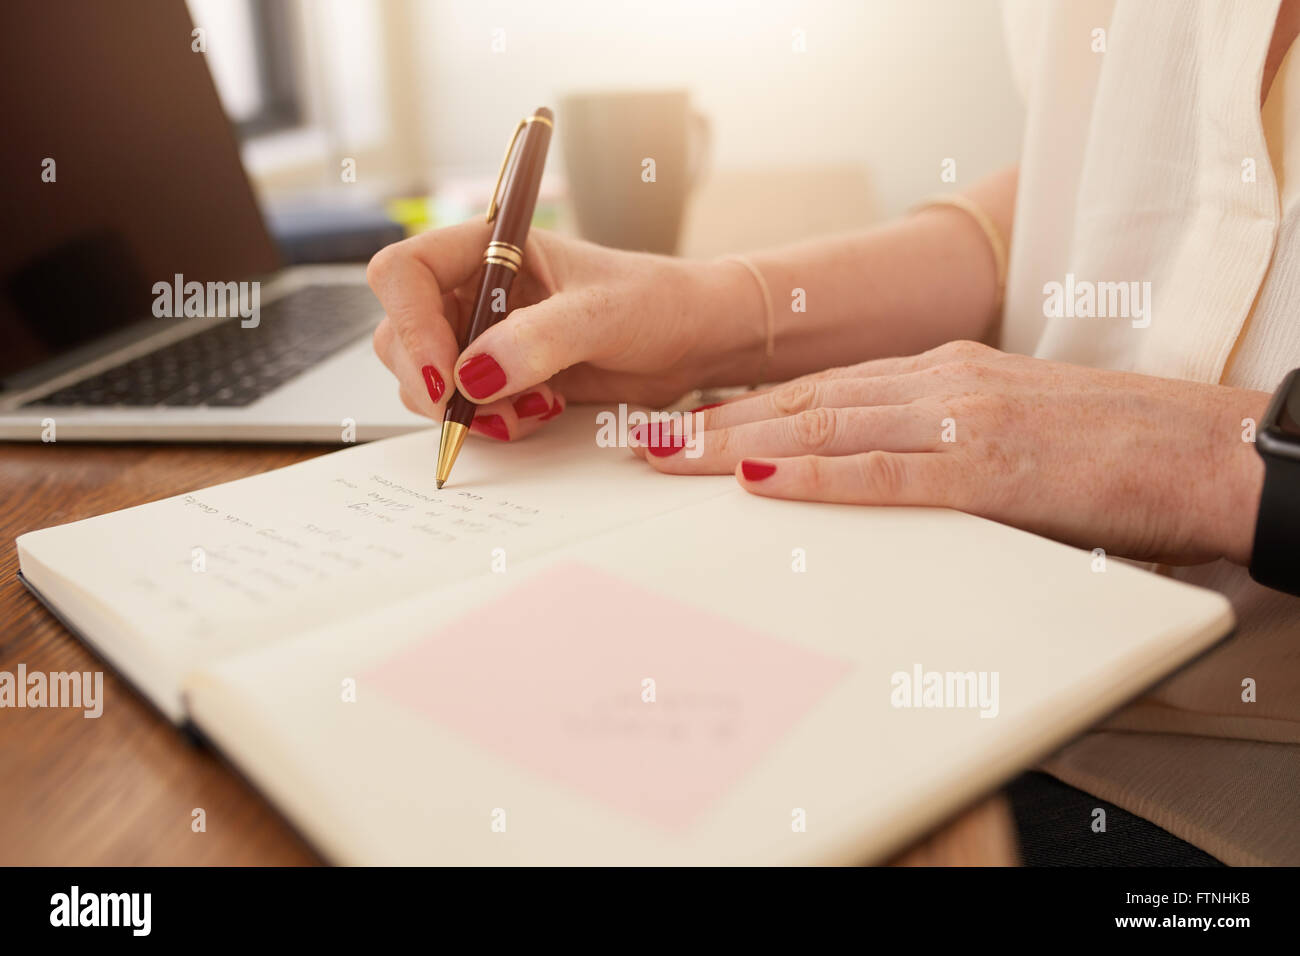 Close up image of woman writing notes in her diary. Businesswoman sitting at her desk and taking important notes in her personal Stock Photo